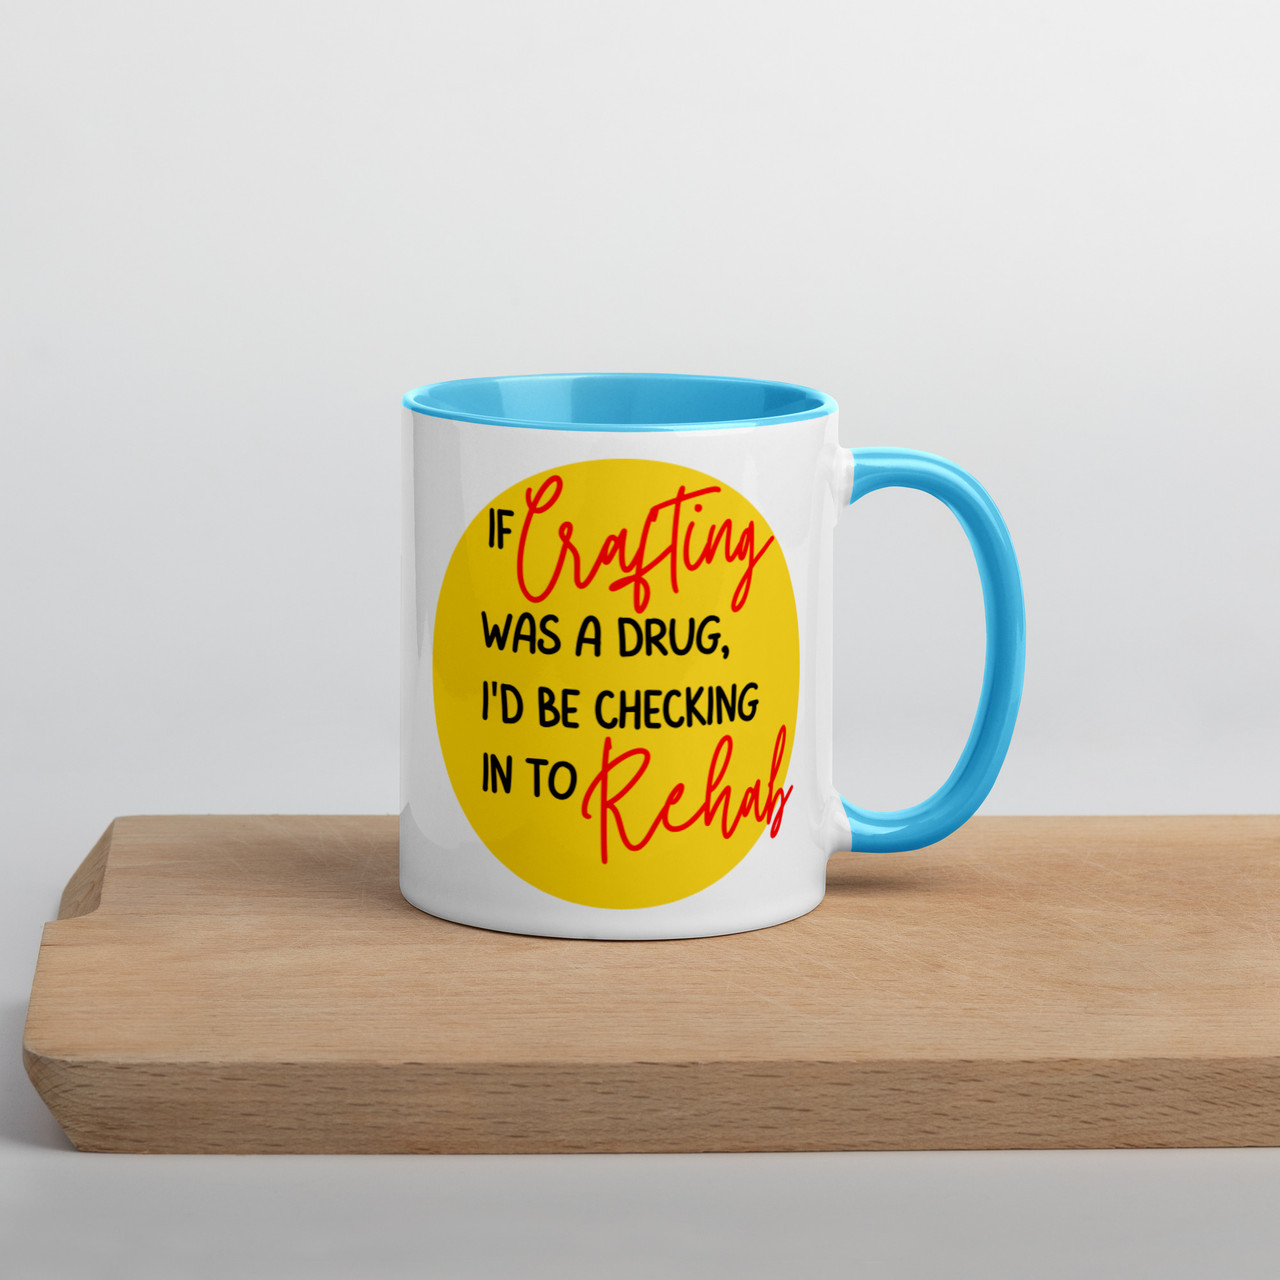 If crafting was a drug - Mug with Colour Inside